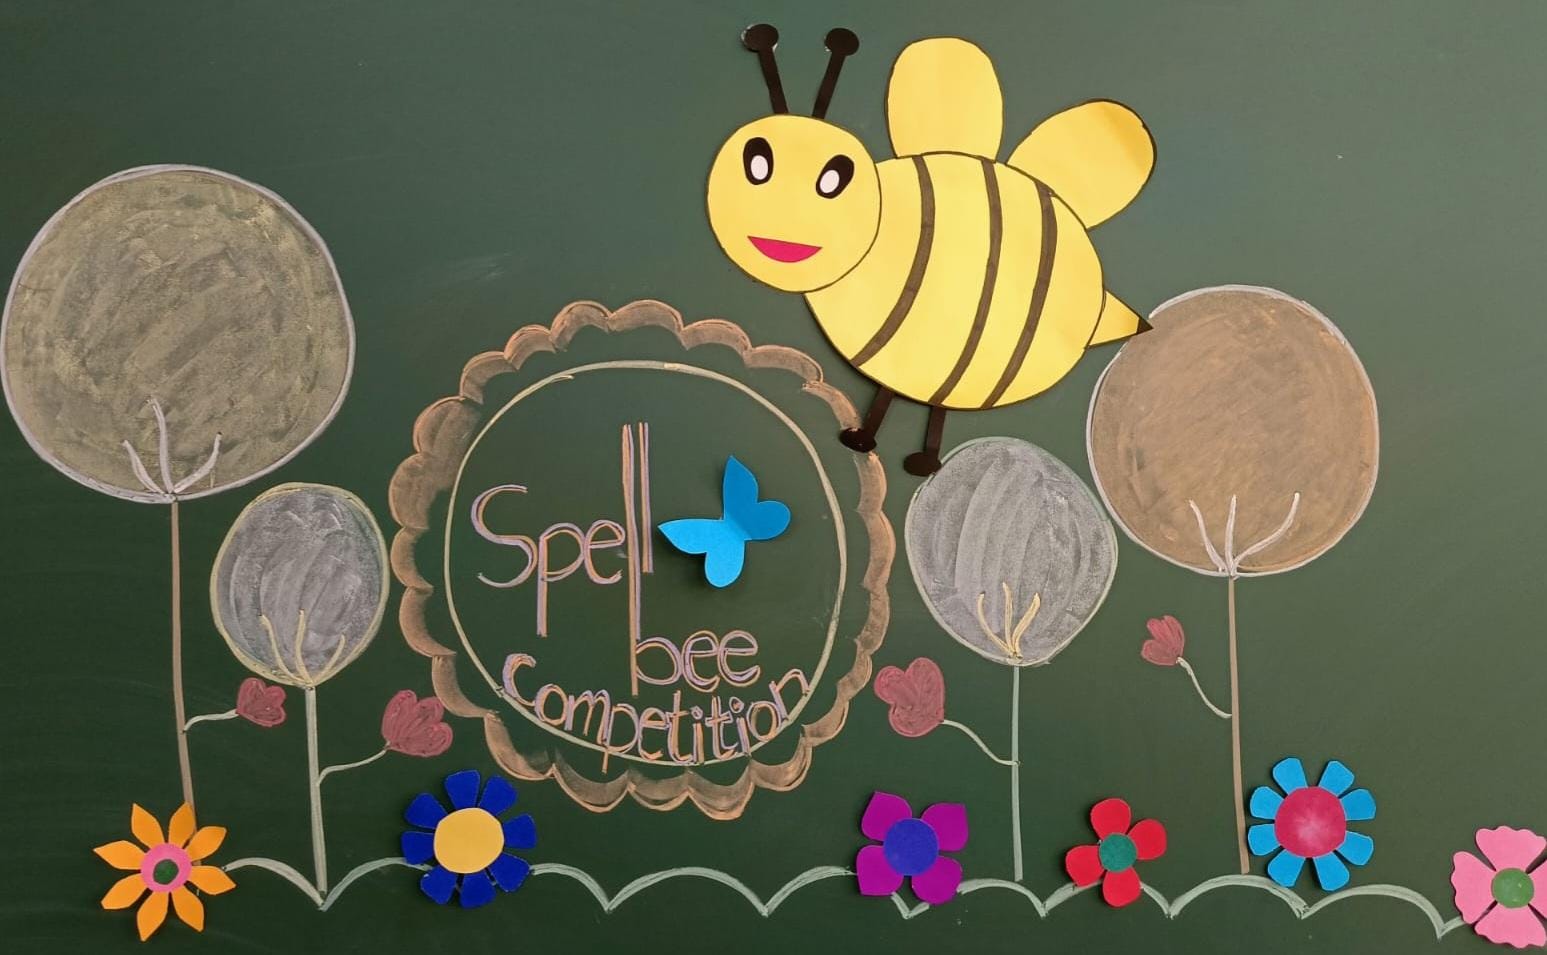 Spell bee competition